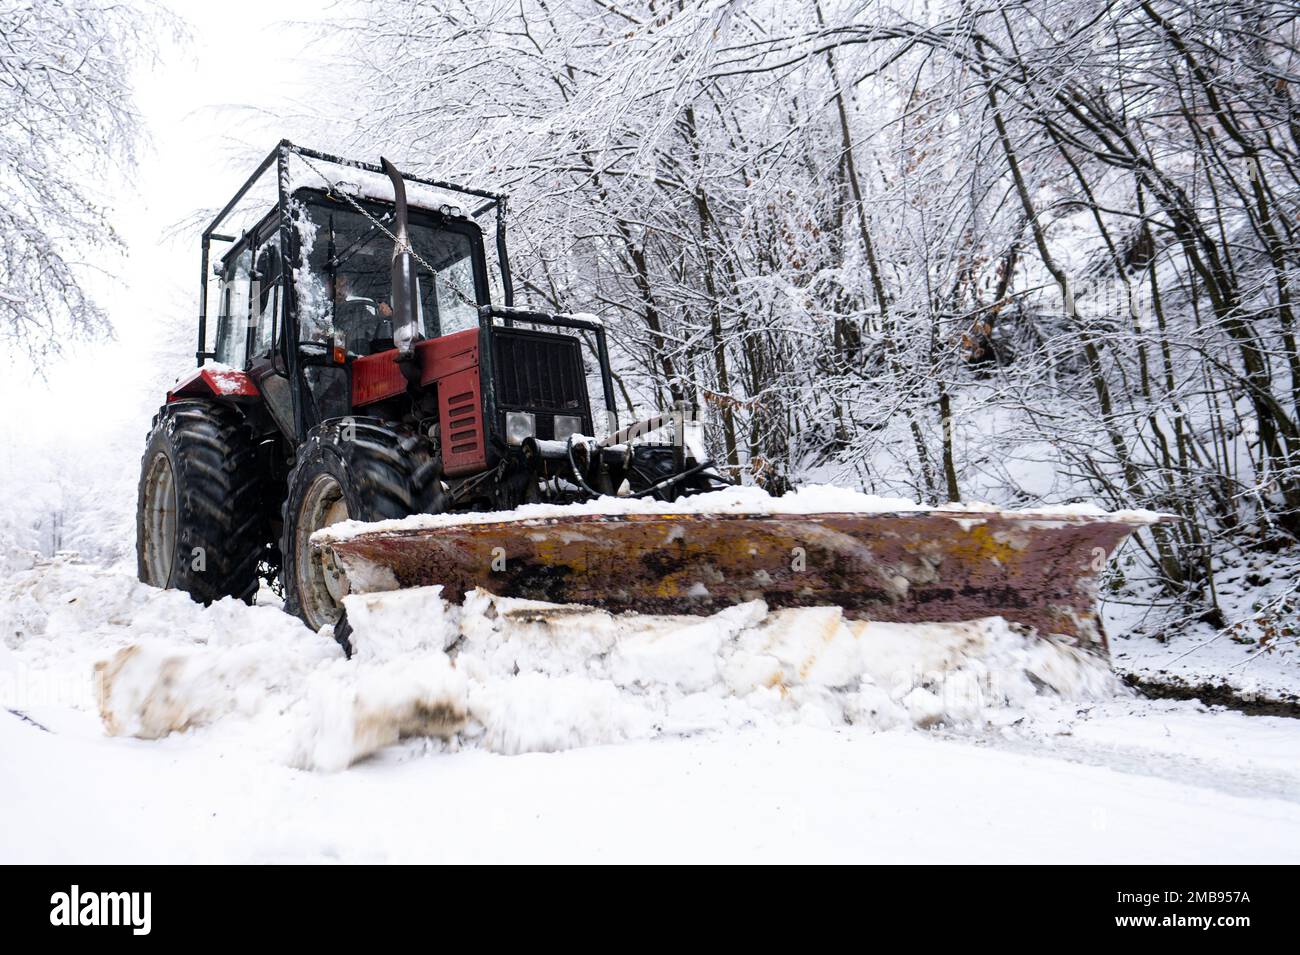 A tractor shoveling snow from a mountain road in the Carpathians, Poland. Stock Photo